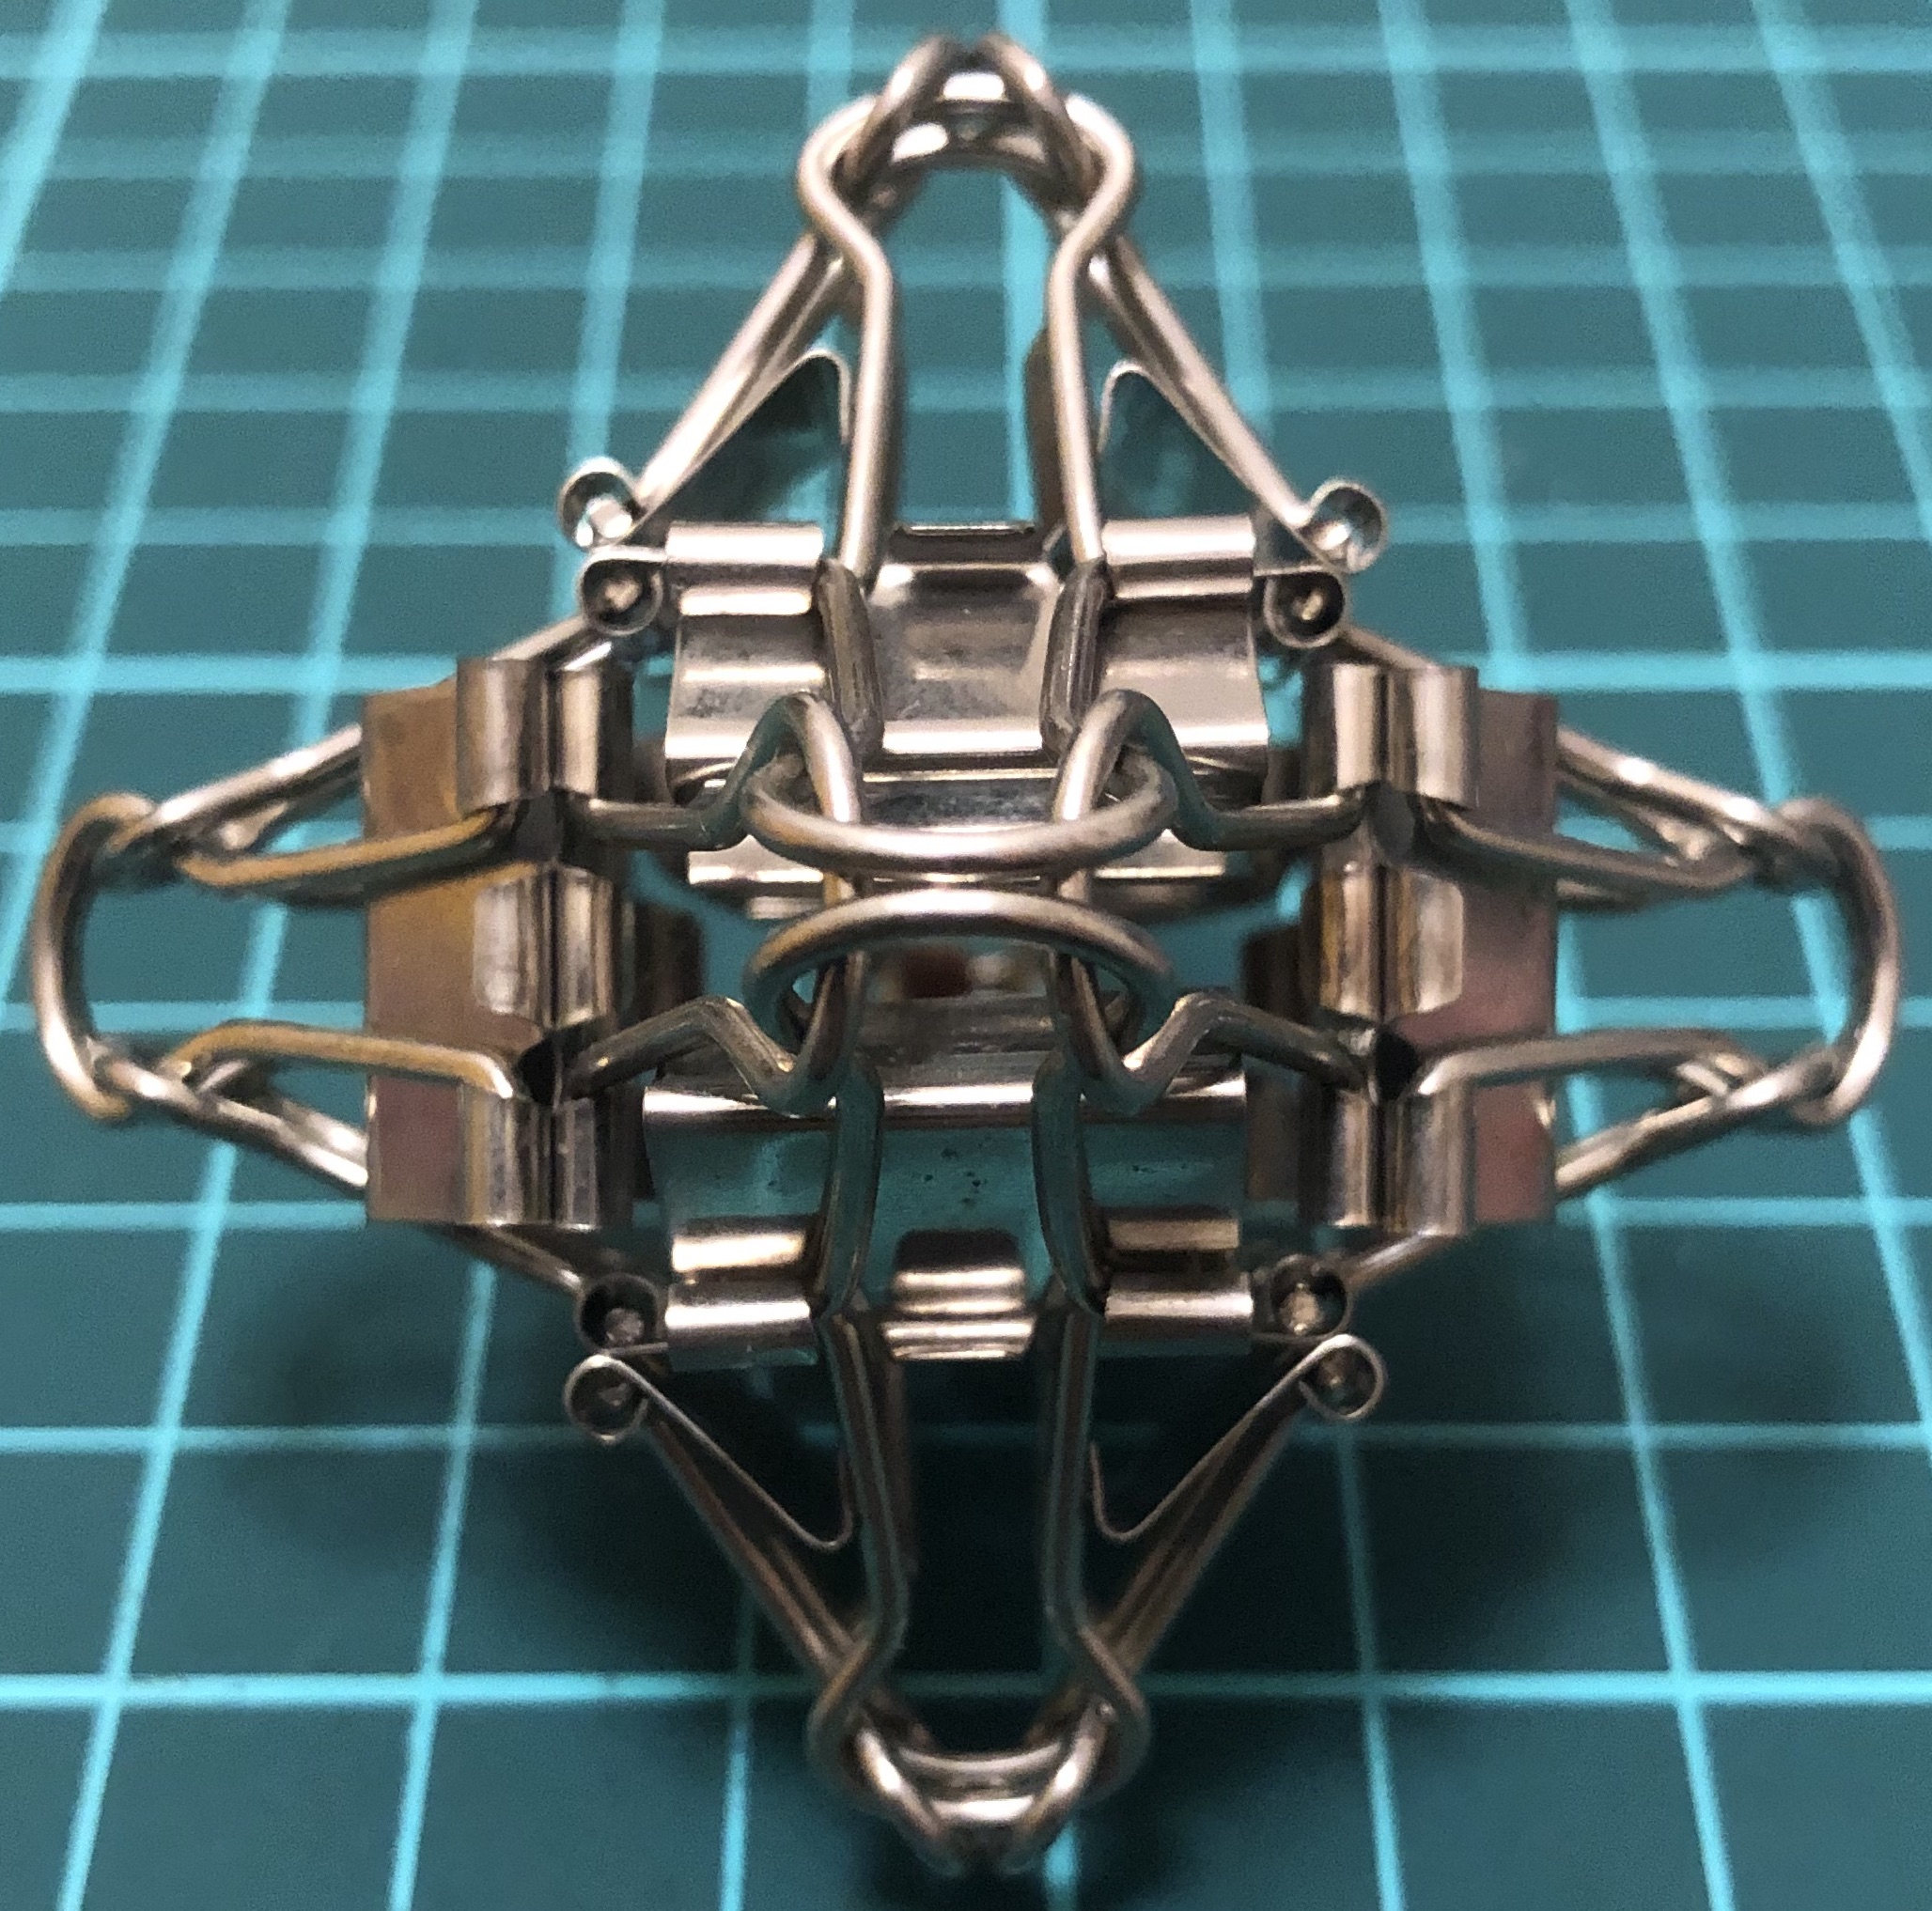 12 clips forming spiky octahedron